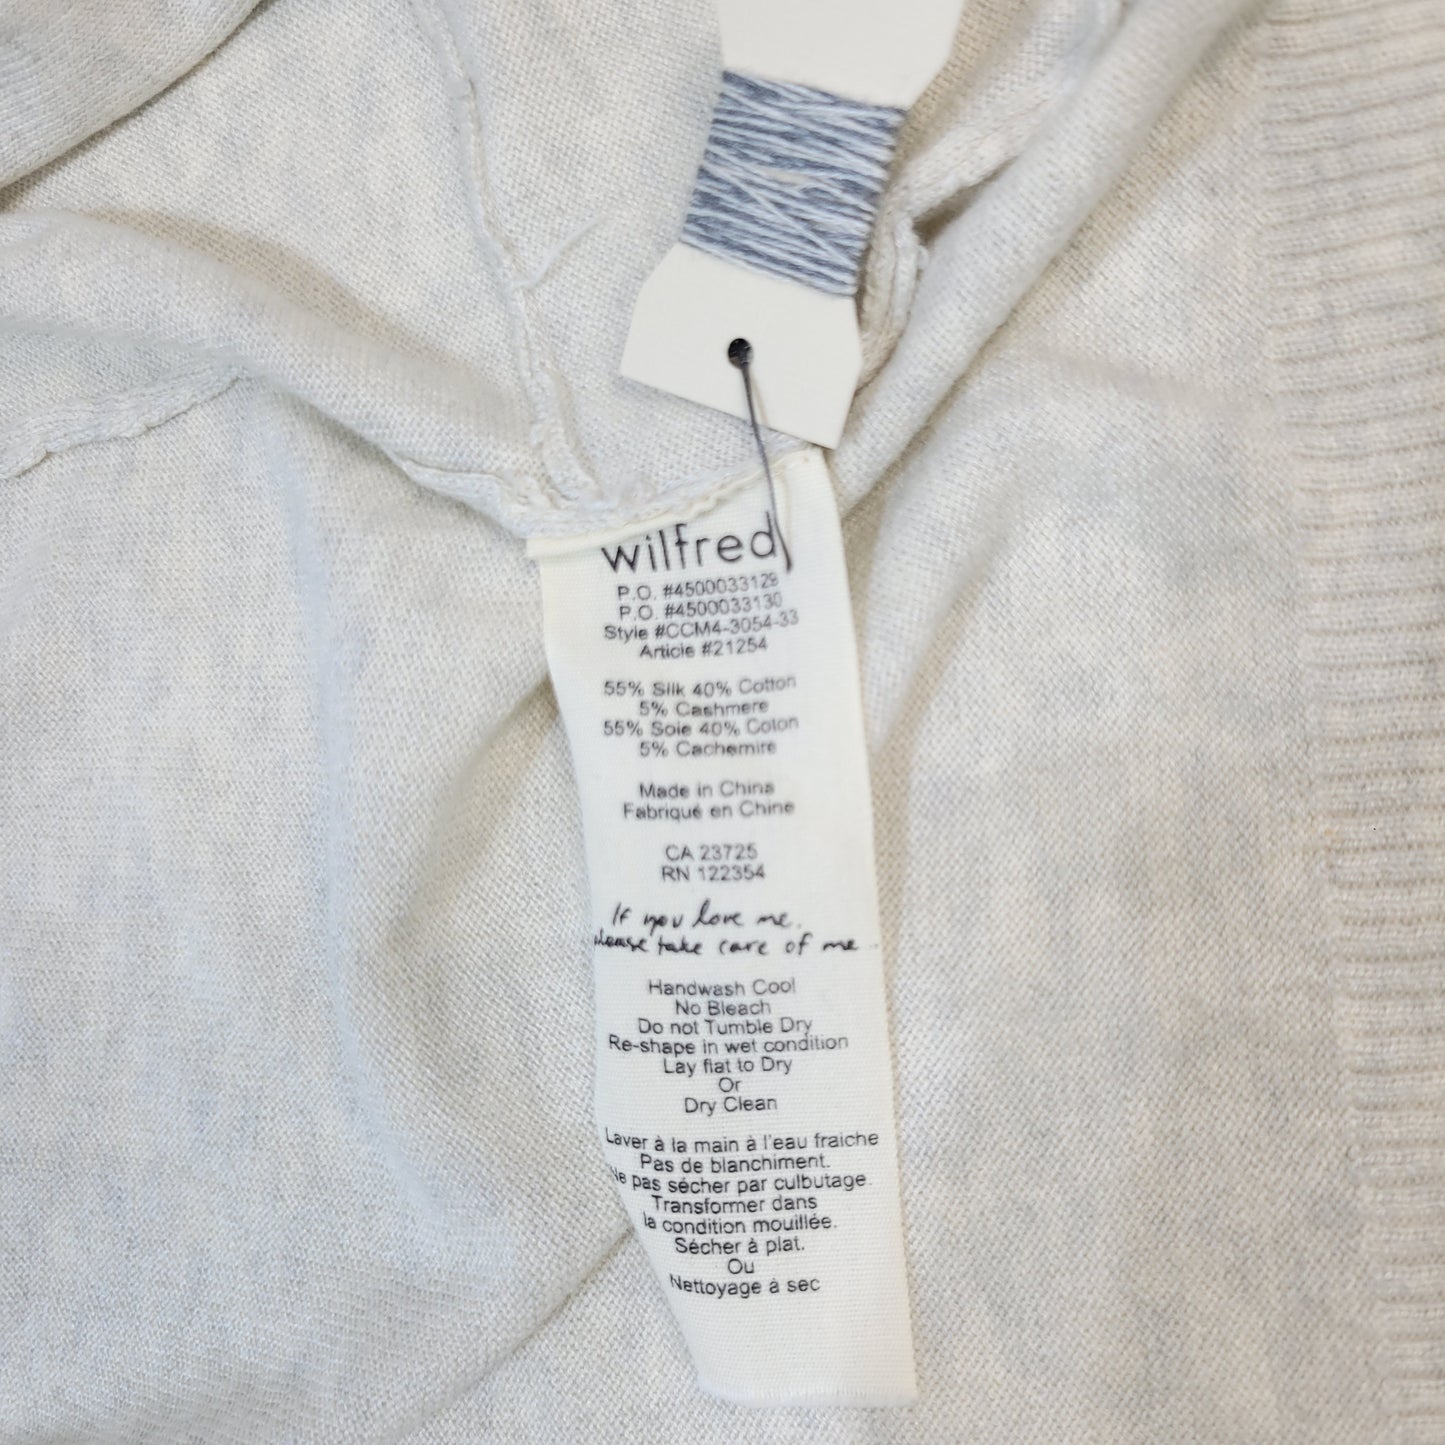 Wilfred Silk and Cashmere Women's Cardigan Light Grey/Black - Small